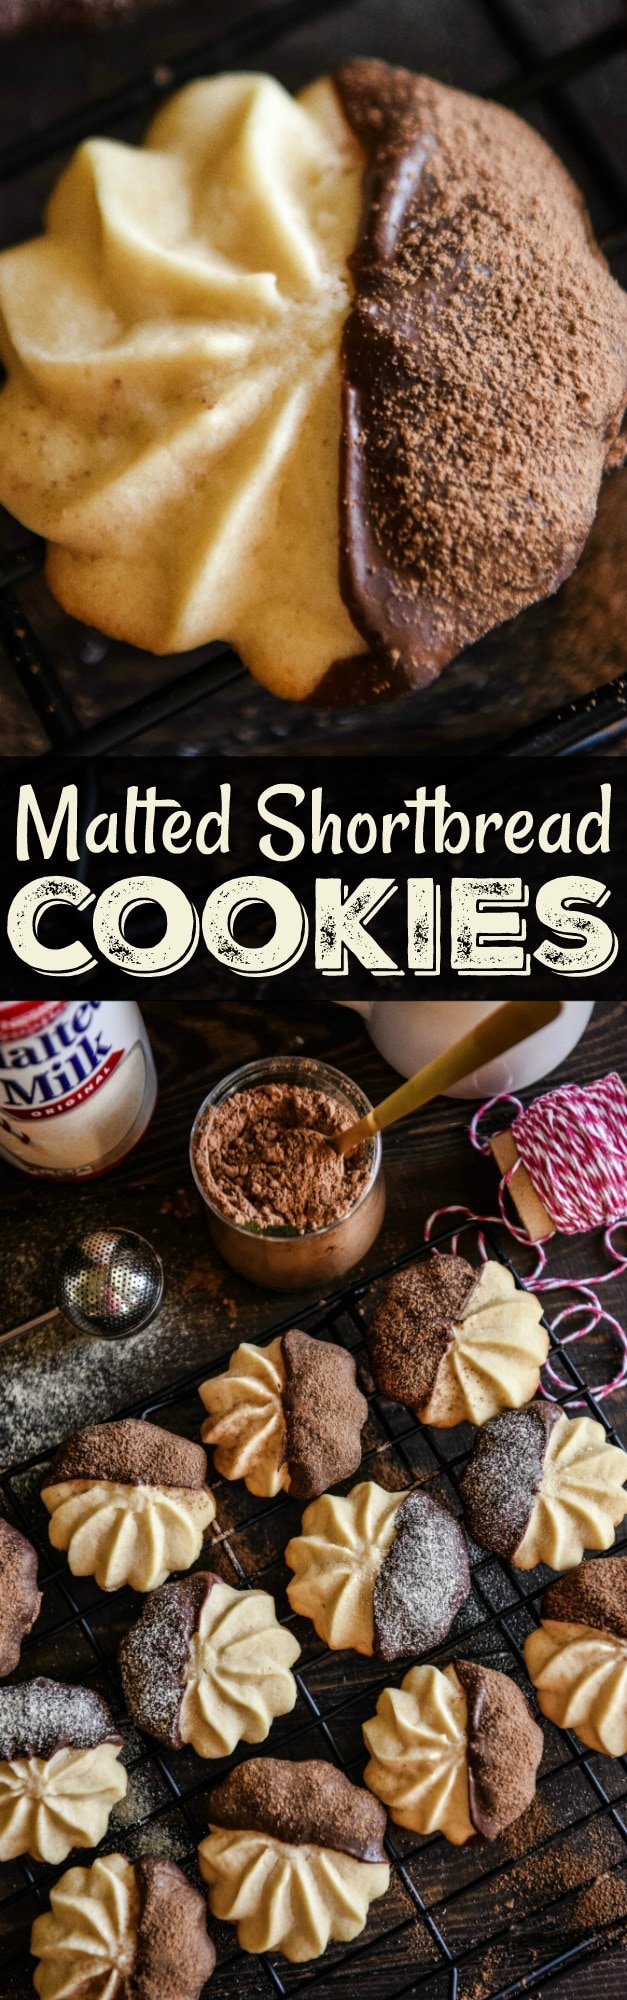 A Collage of Two Different Images of Malted Shortbread Cookies